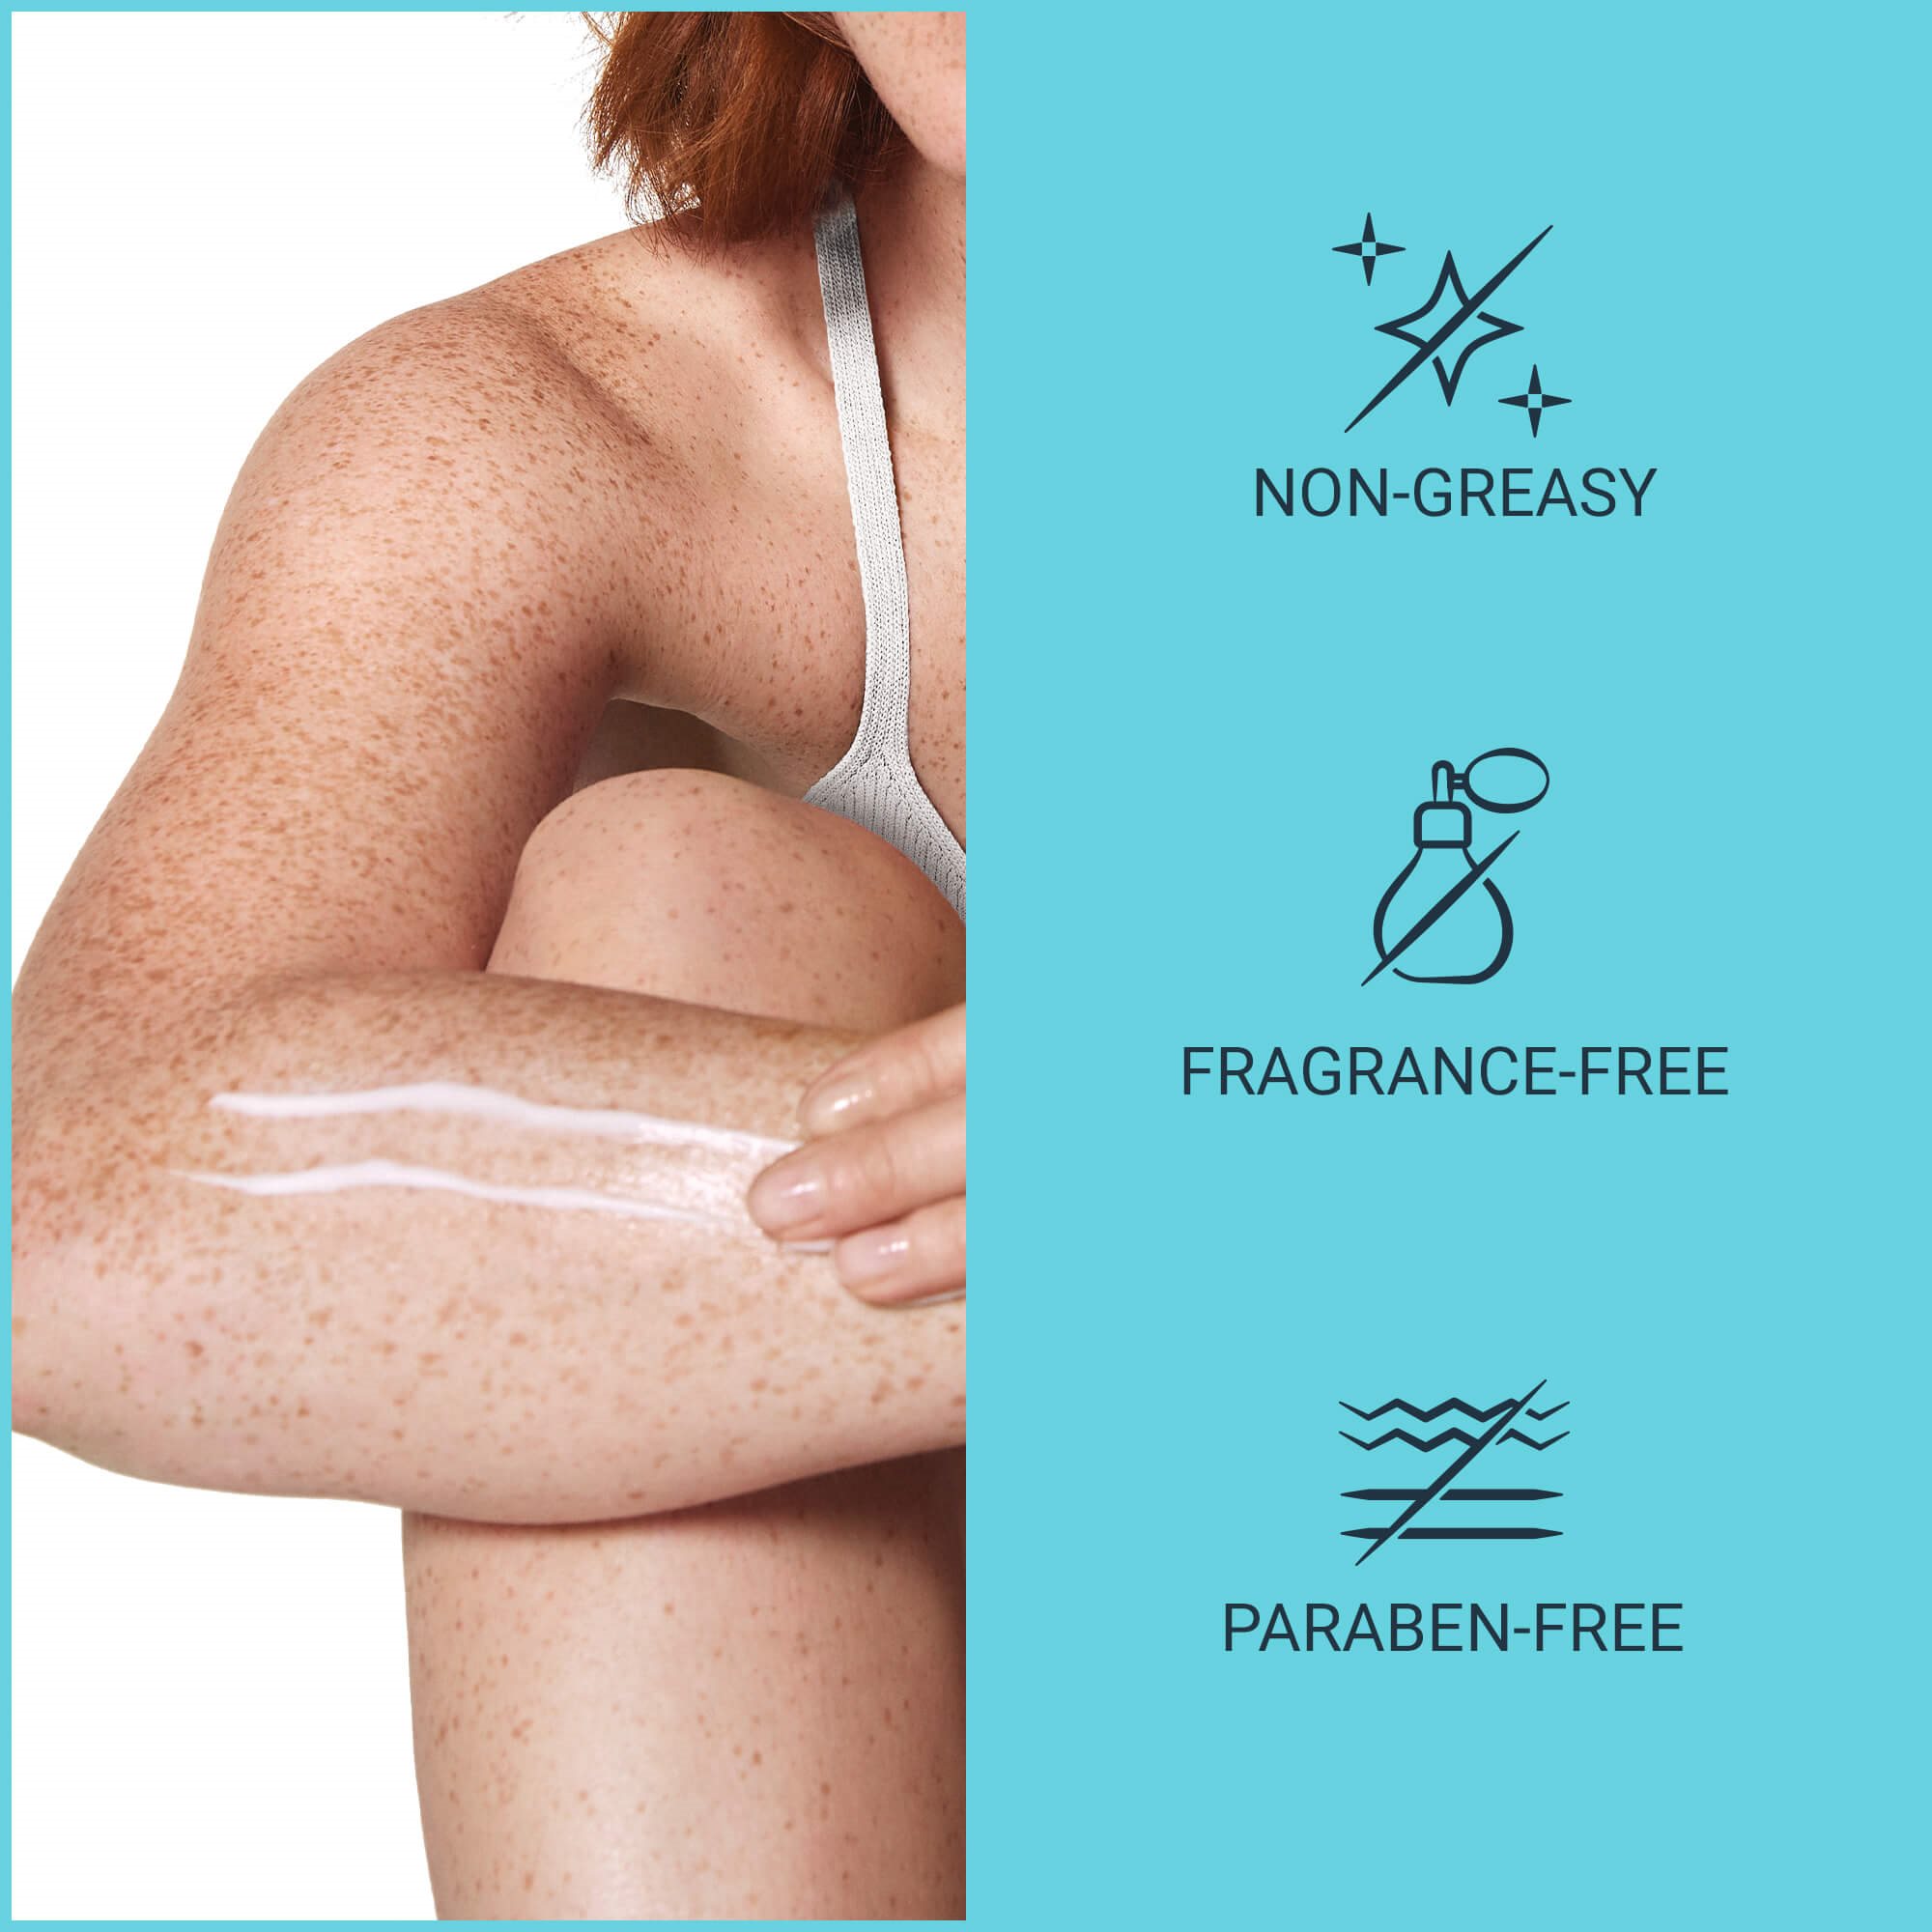 Image of freckled model applying Eucerin Complete Repair lotion on right arm.